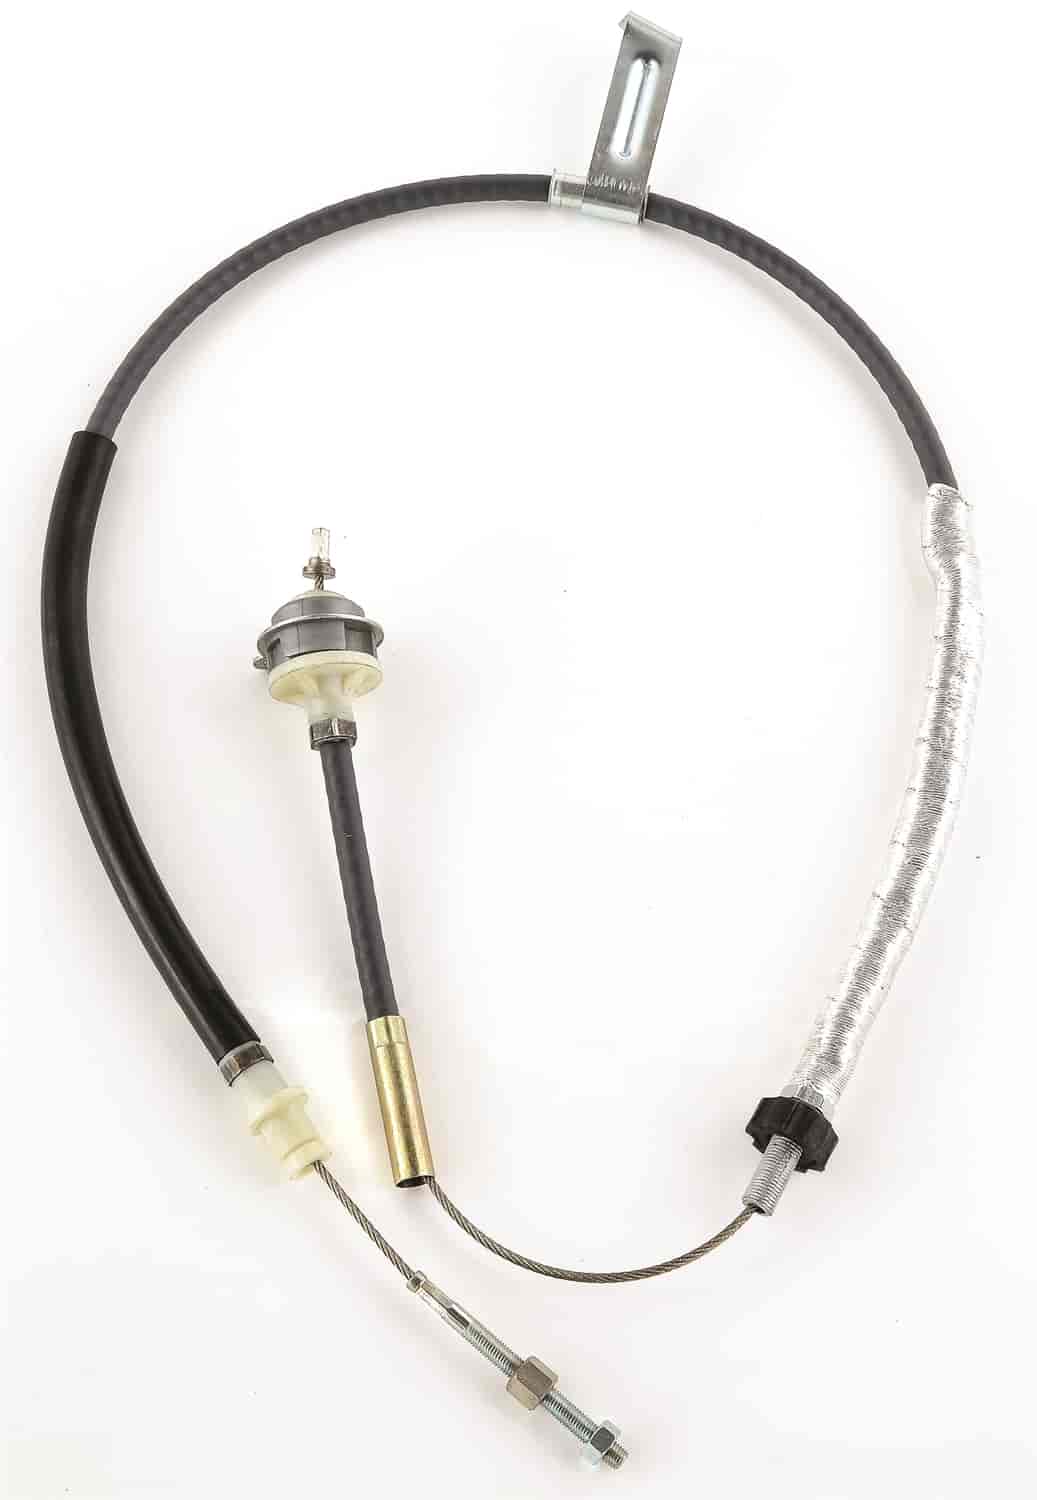 Heavy-Duty Adjustable Clutch Cable 1979-95 Mustang 5.0L 302 V8